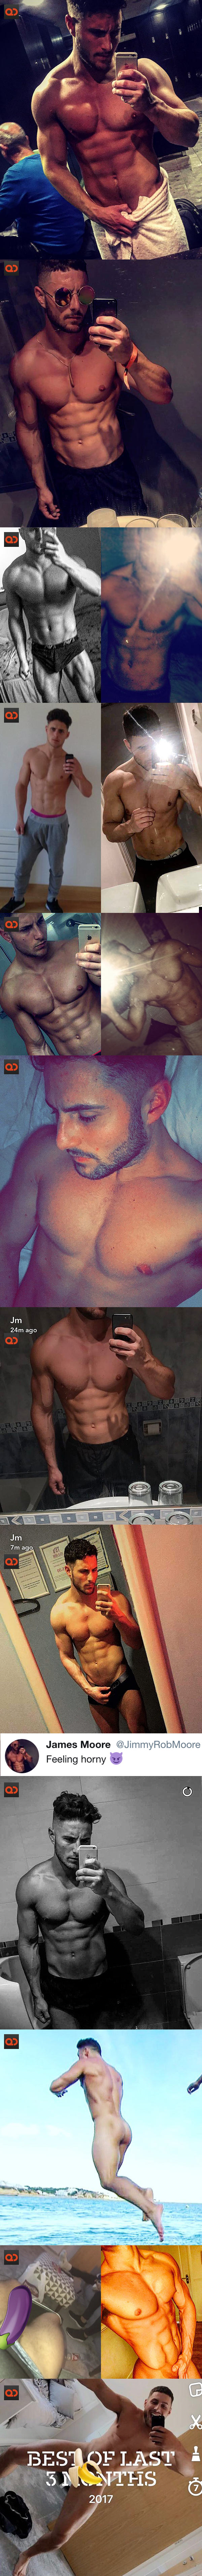 James Moore, From Ex On The Beach, Gets His Horny Mood On In Explicit Leaked Cock Snaps!